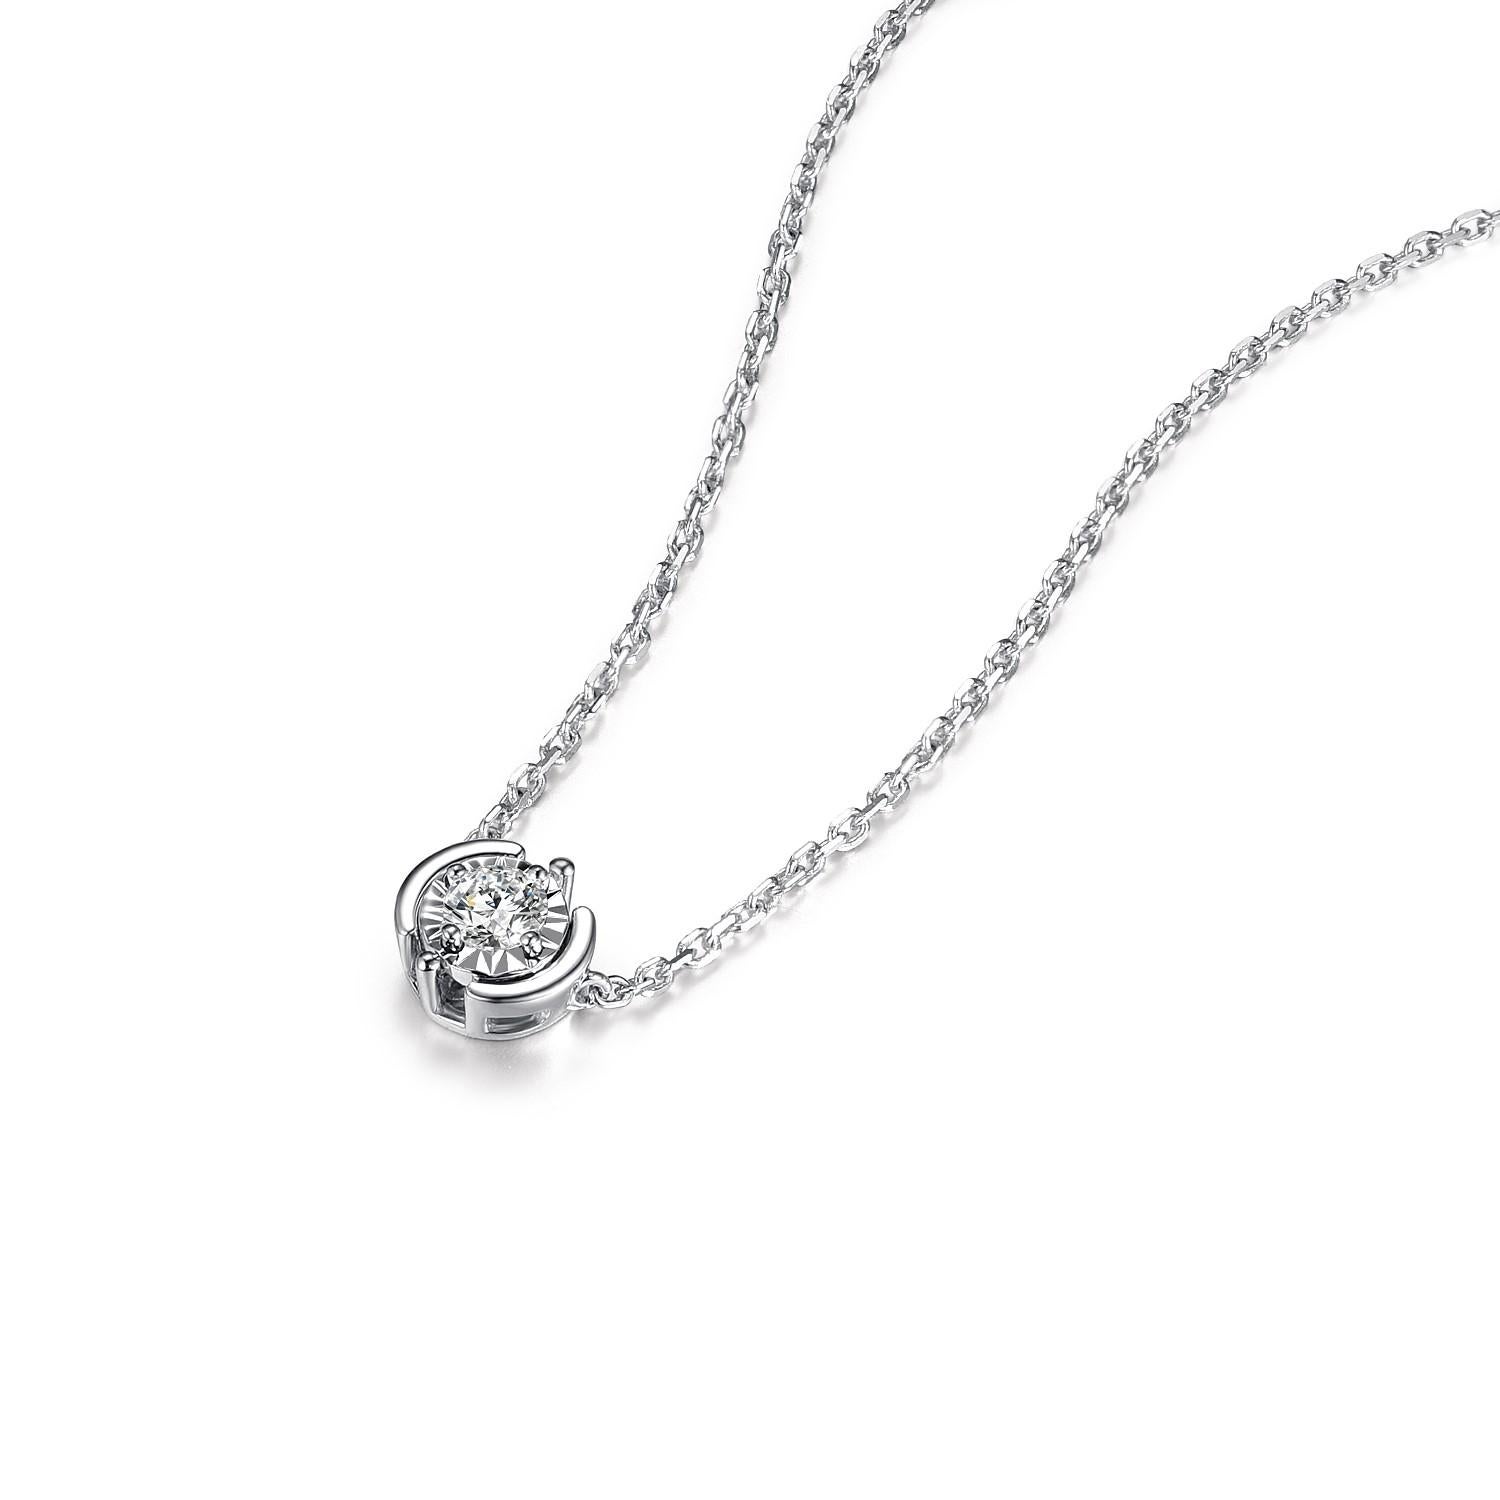 This necklace features 0.10 carat center diamond in 18 karat rose and white gold. The chain length is 17 inch.

Chain 17 inch
Round Cut Diamonds 0.10carat  Diameter:6mm
